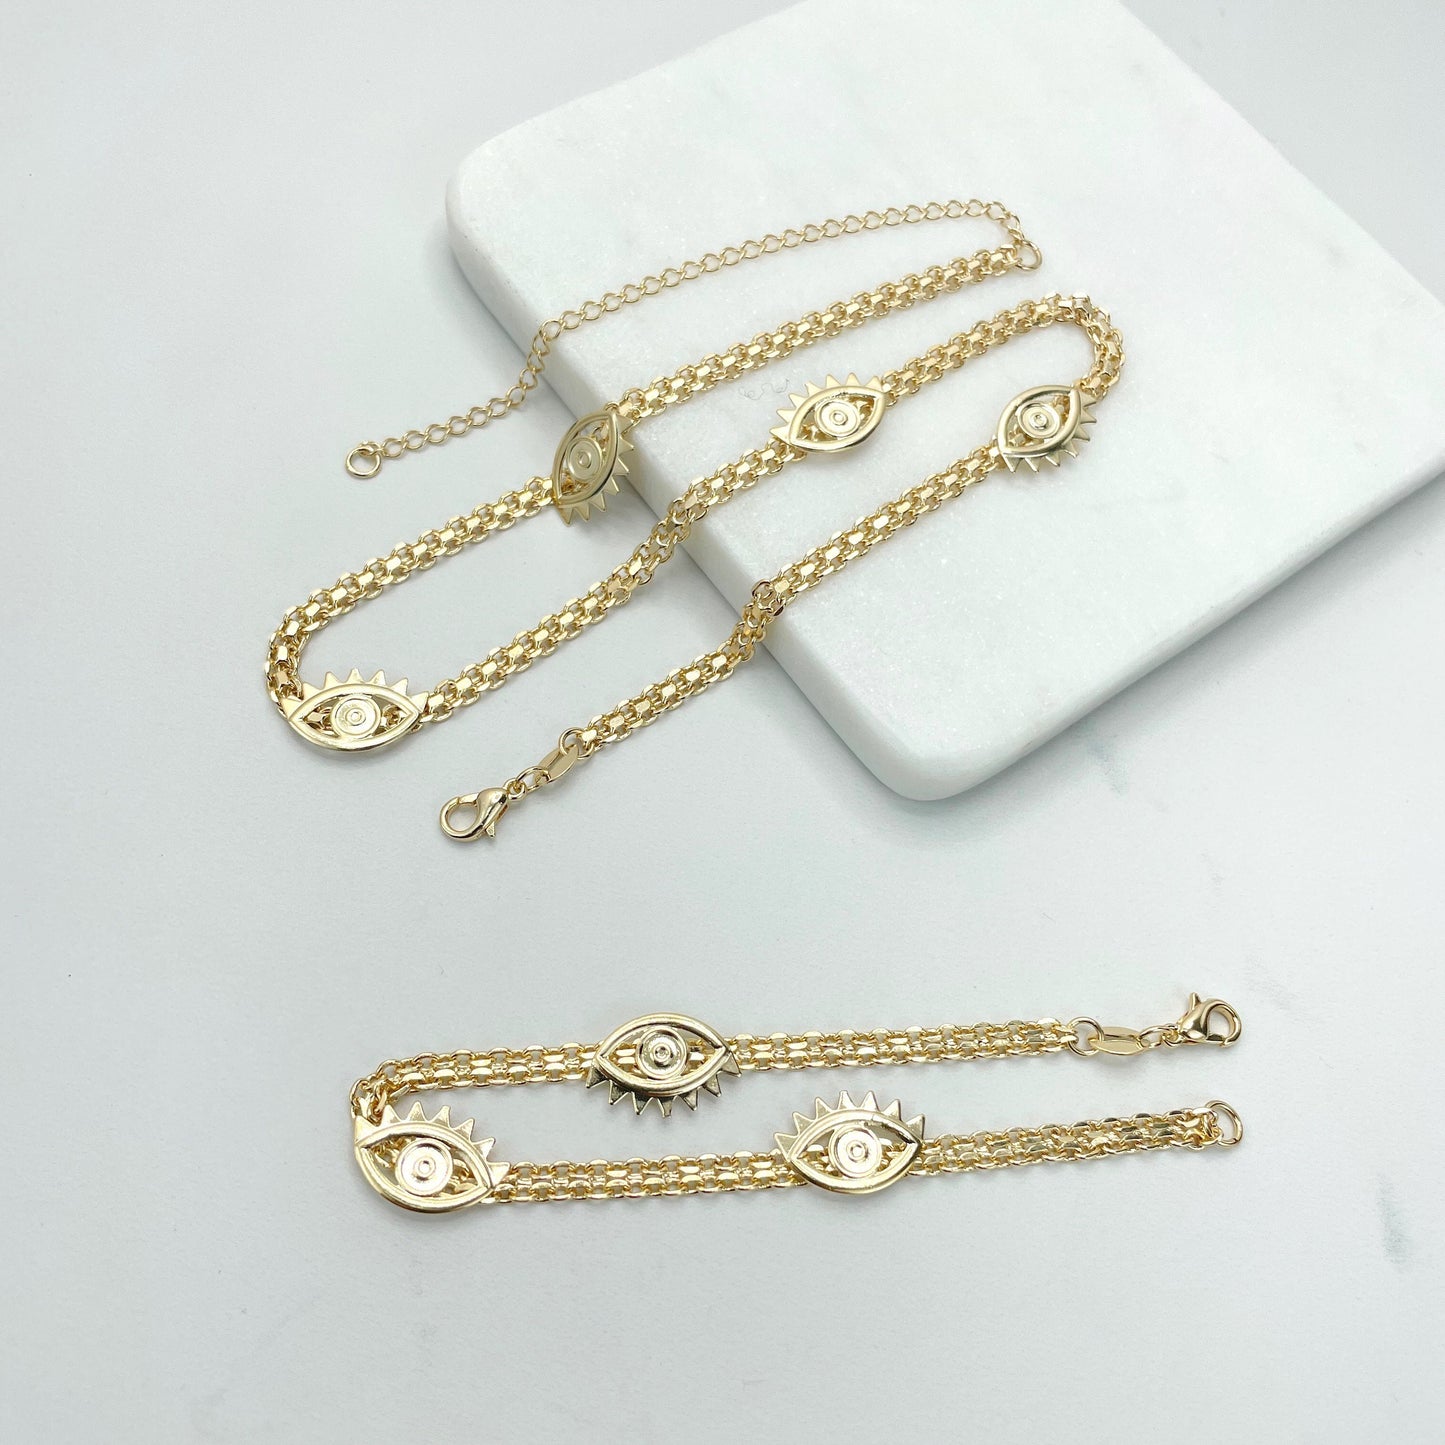 18k Gold Filled 4mm Double Oval Chain, Evil Eyes Charms Necklace or Bracelet Wholesale Jewelry Making Supplies